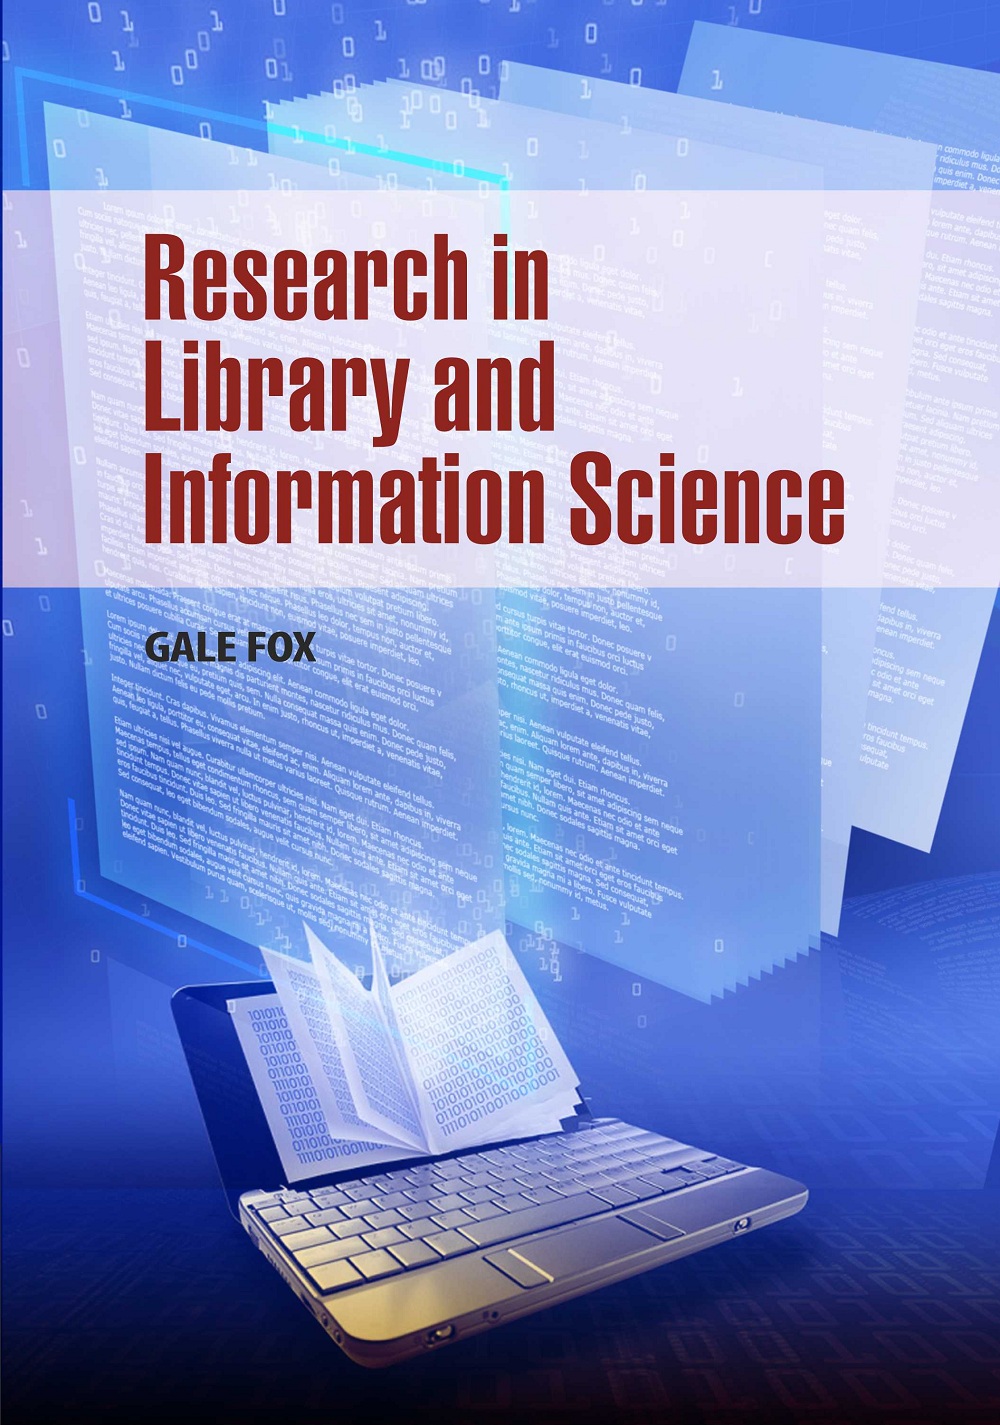 Research in Library and Information Science